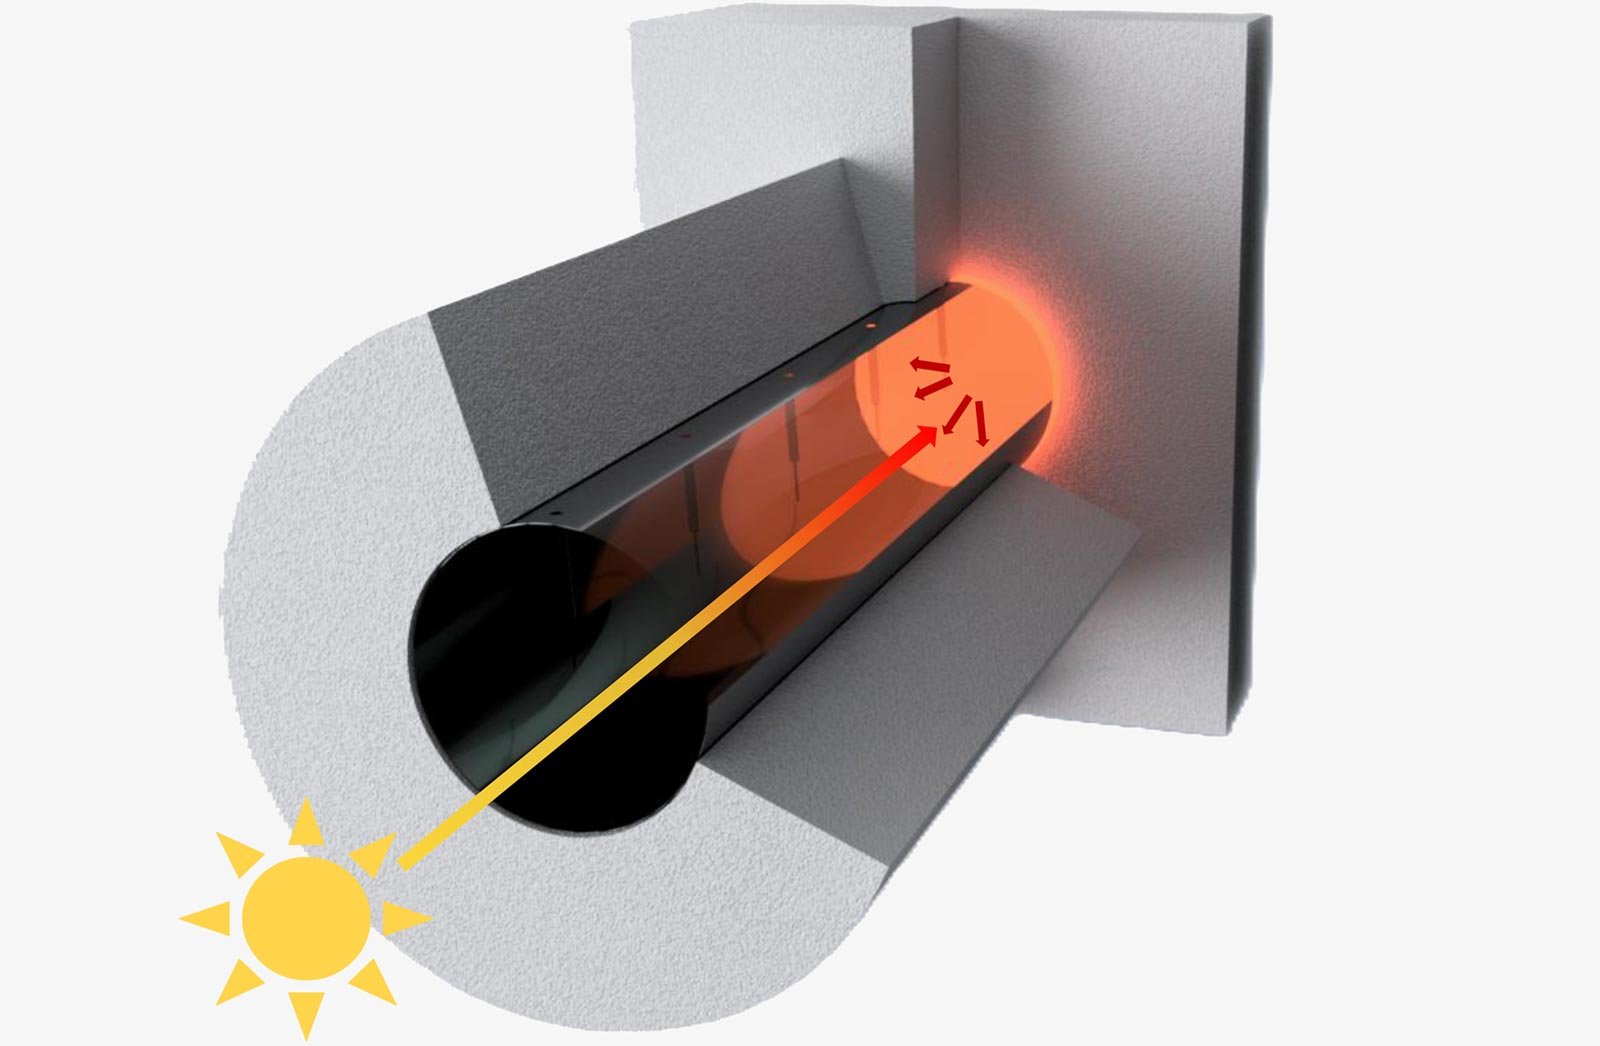 Innovative Thermal Trap Reaches Over 1000 °C Using Sunlight